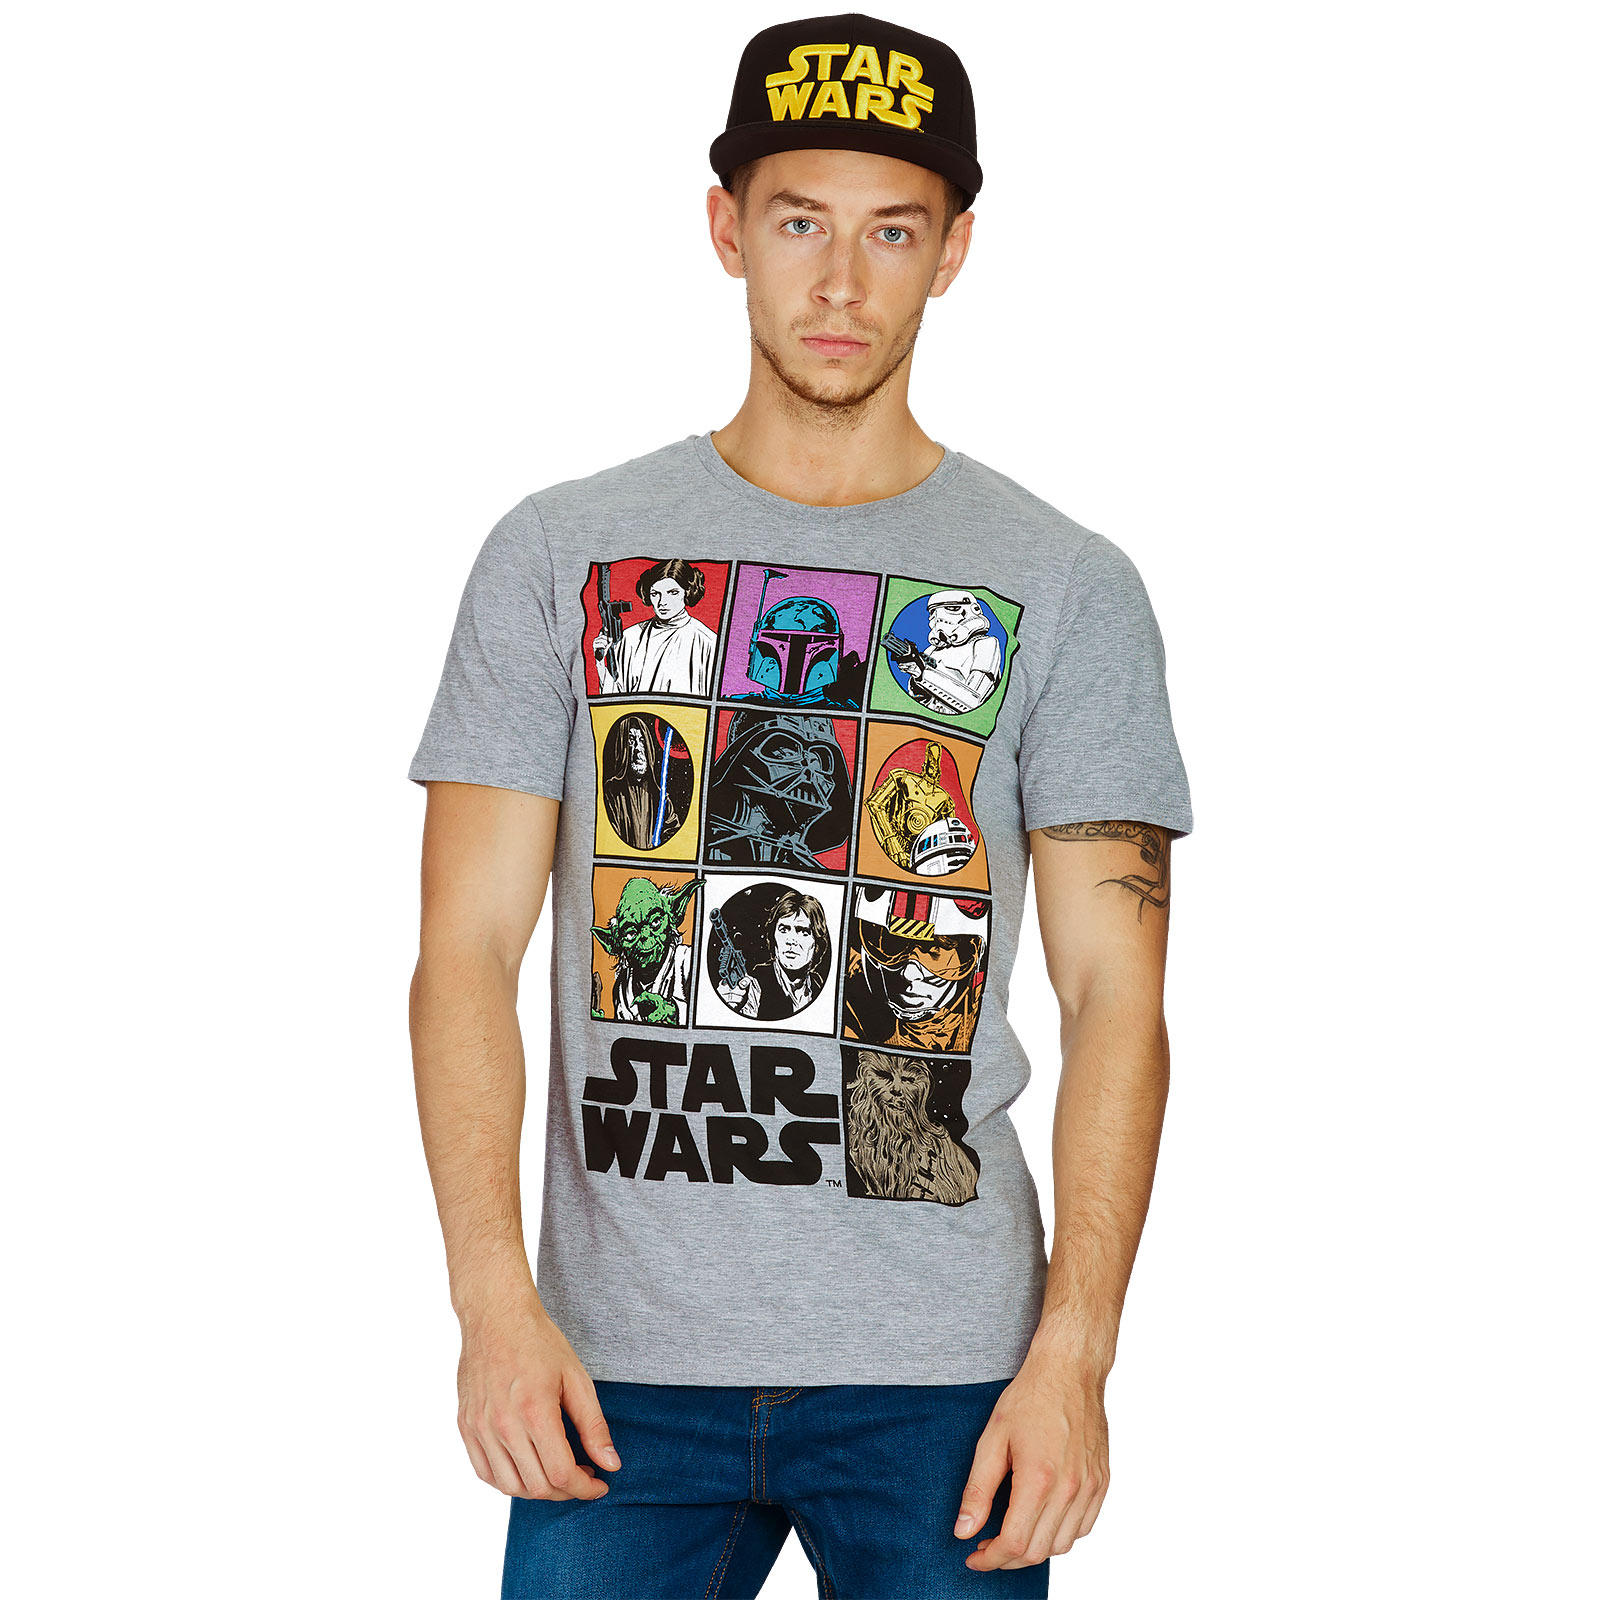 Star Wars - T-shirt Characters gris